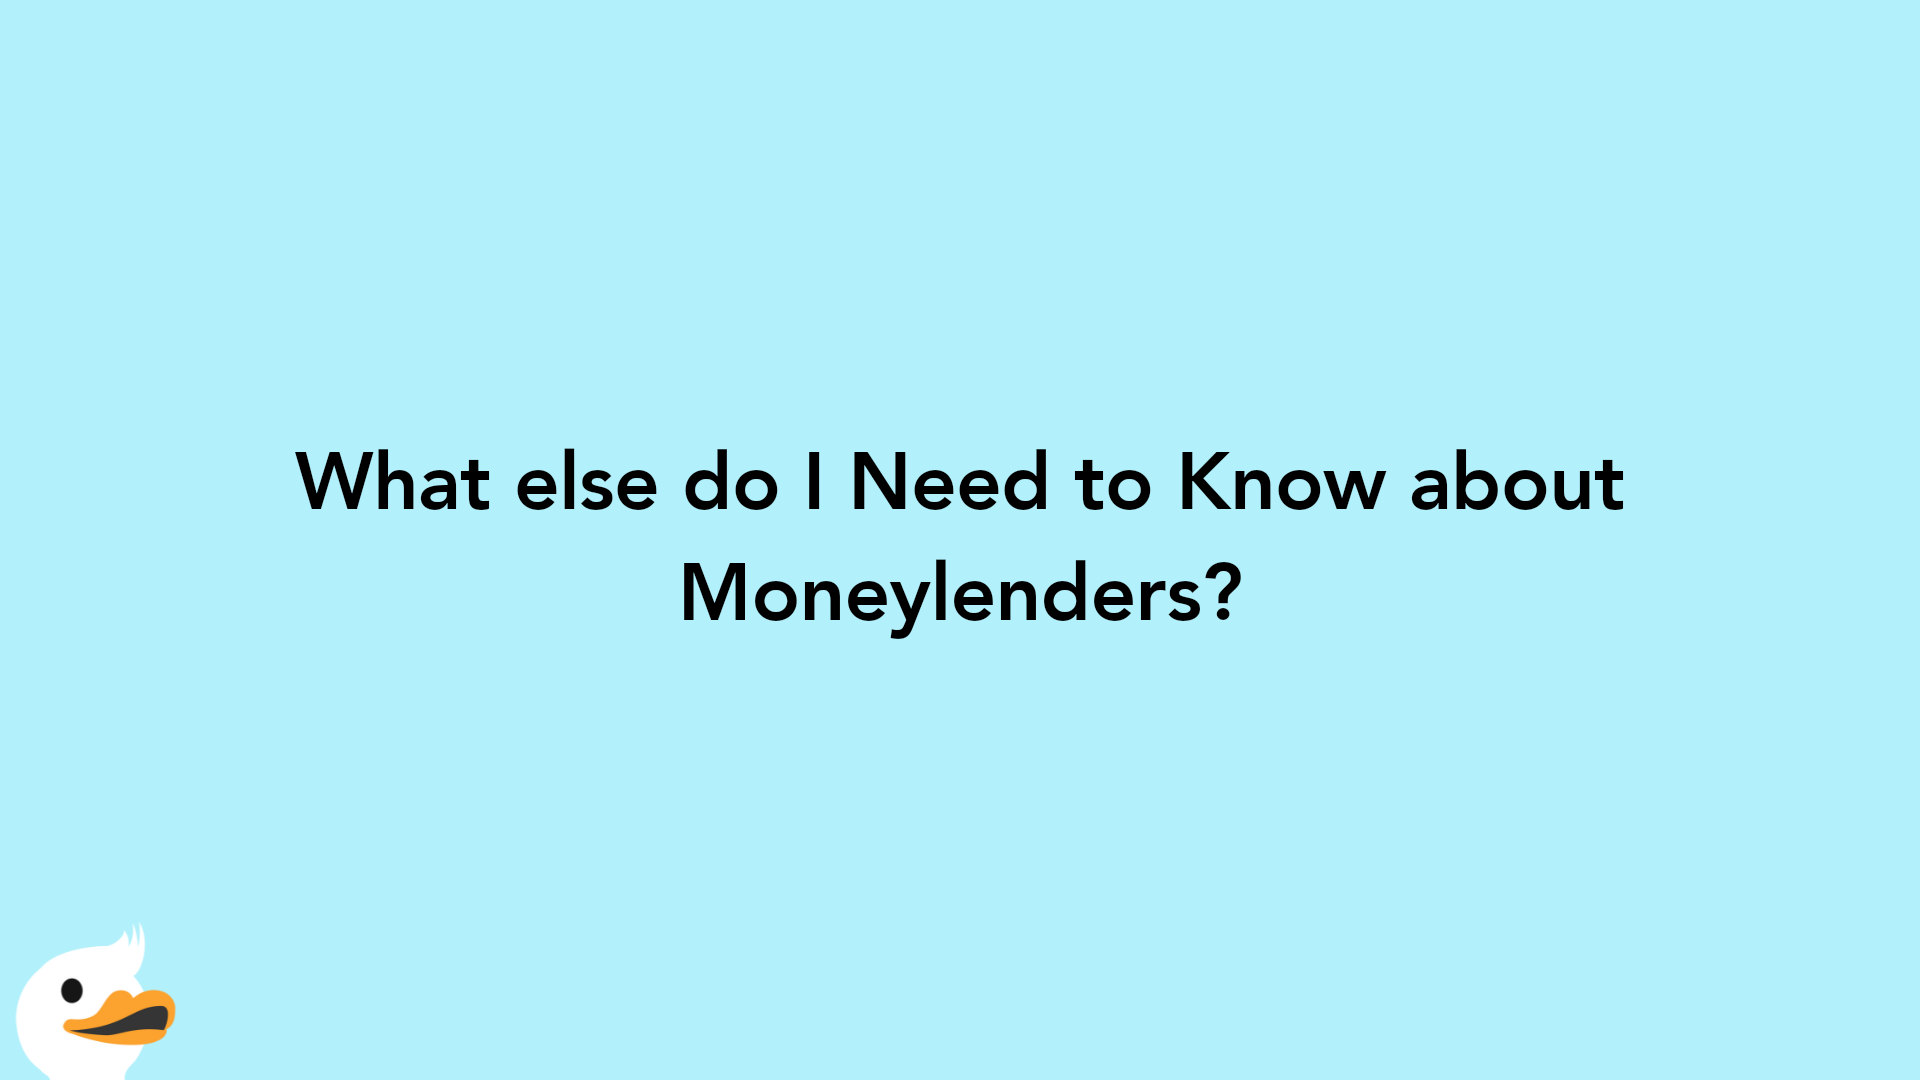 What else do I Need to Know about Moneylenders?